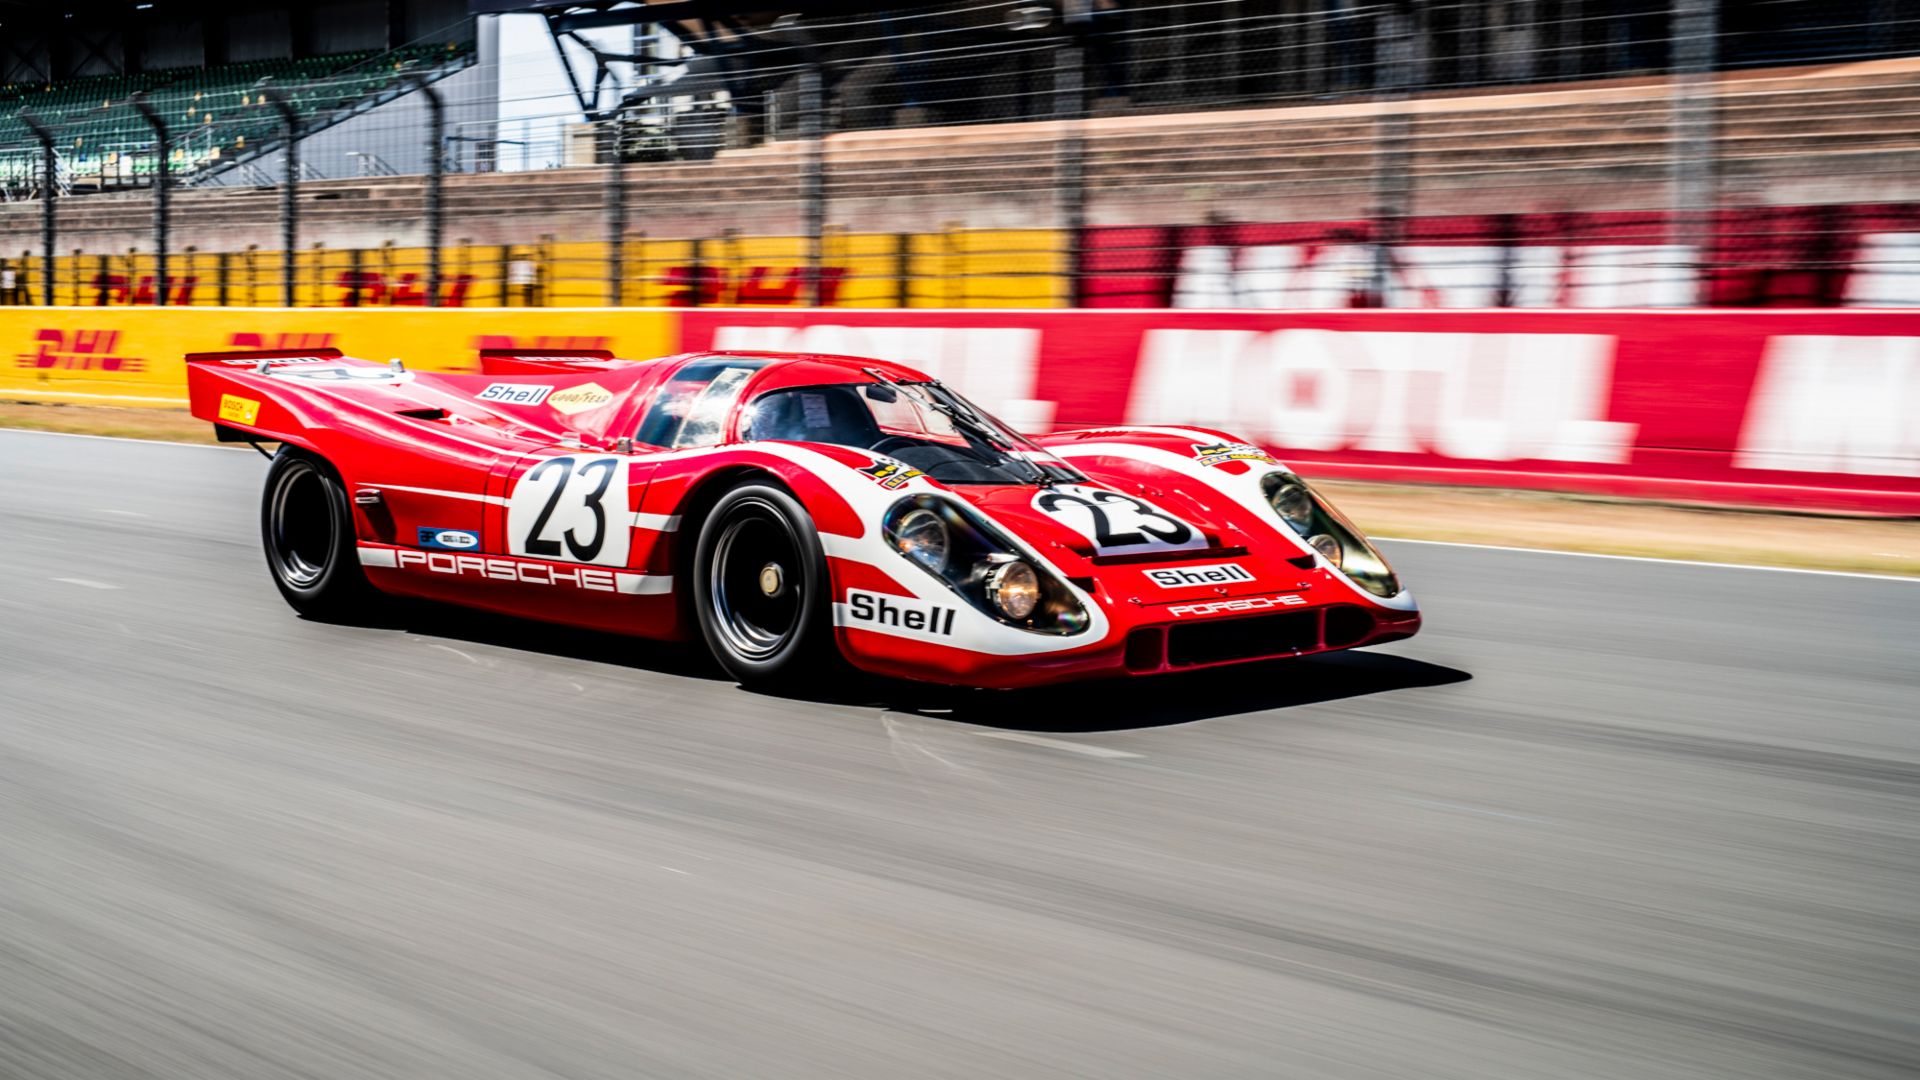 White and red Salzburger liveried Porsche 917 KH on racetrack